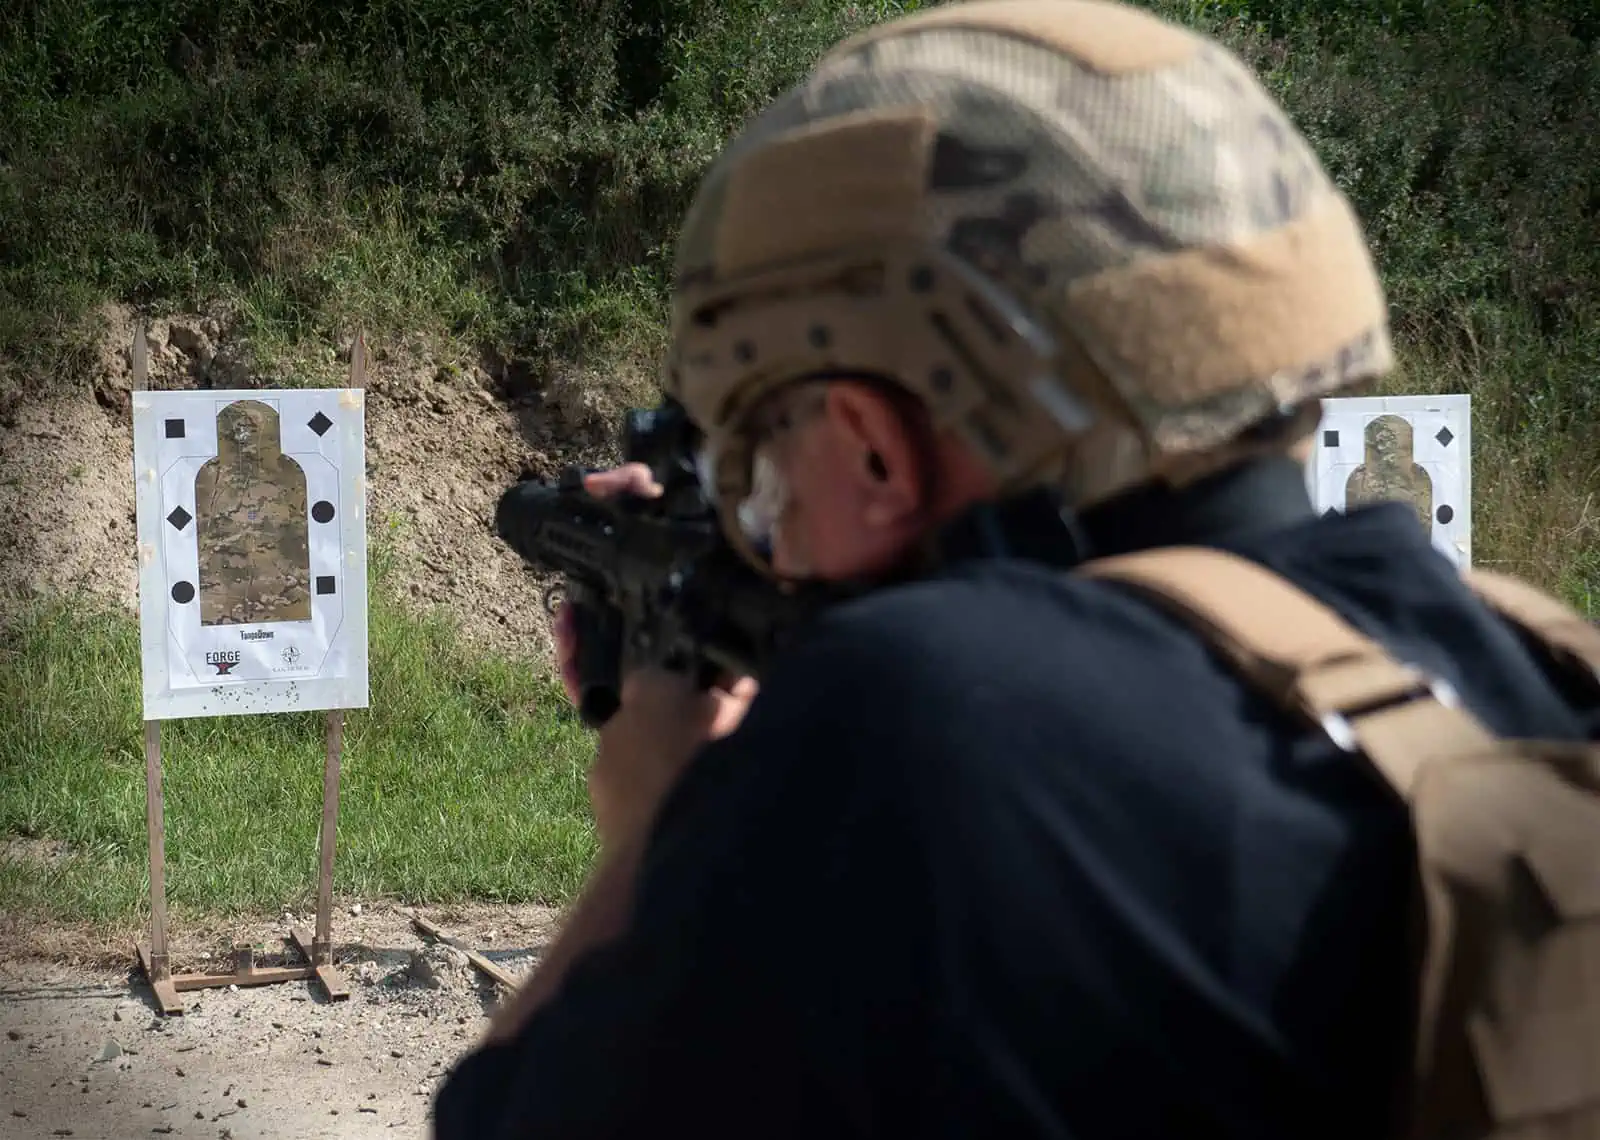 Do You Need Tactical Training - What's Best For the Average Civilian?